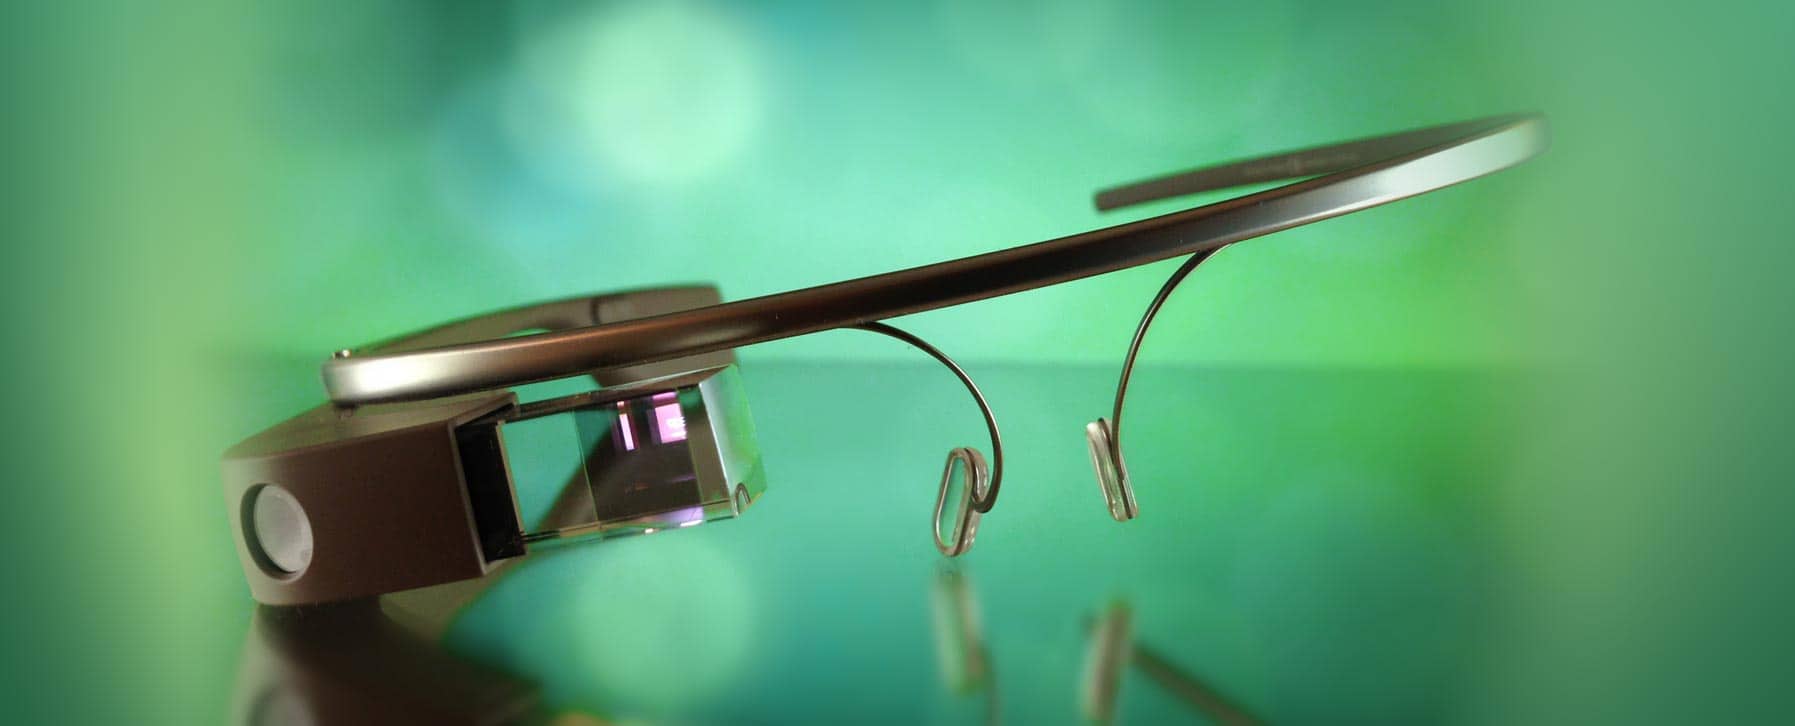 A Week With Google Glass